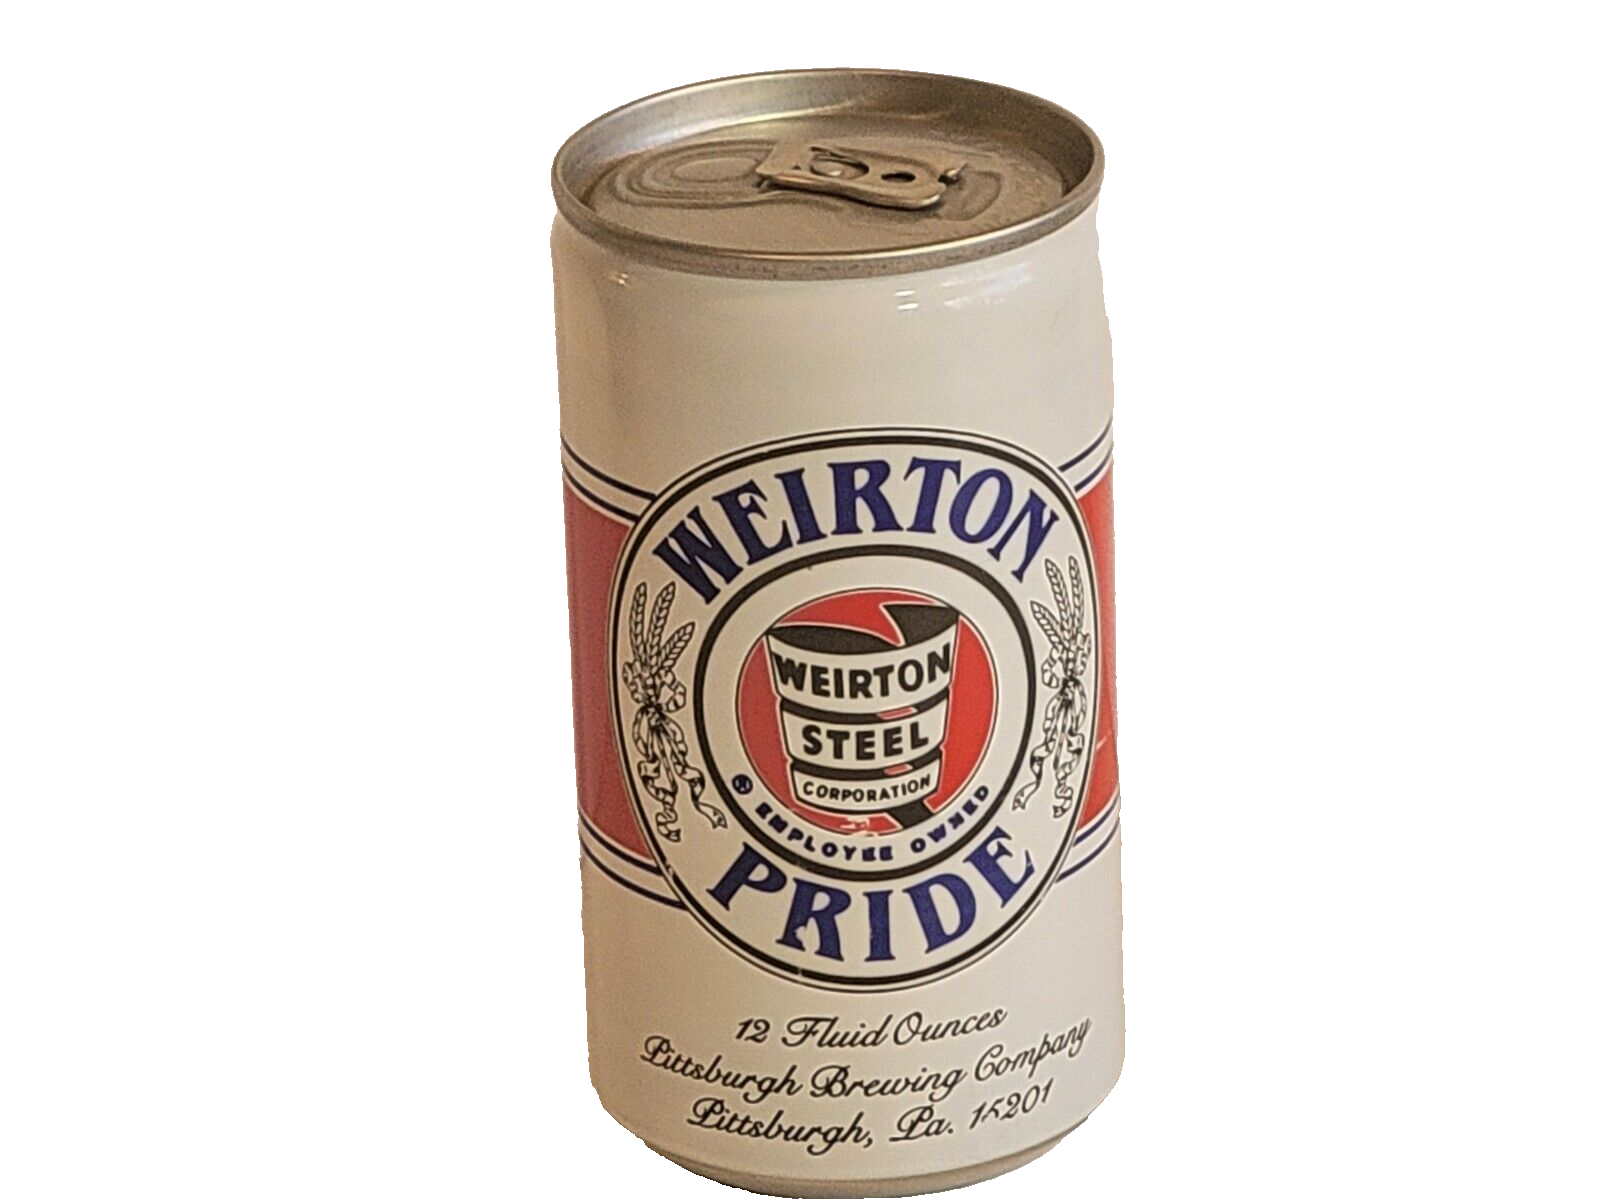 Primary image for 1984 Pull Tab Beer Can WEIRTON PRIDE Iron City Beer Pittsburgh Brewing Company